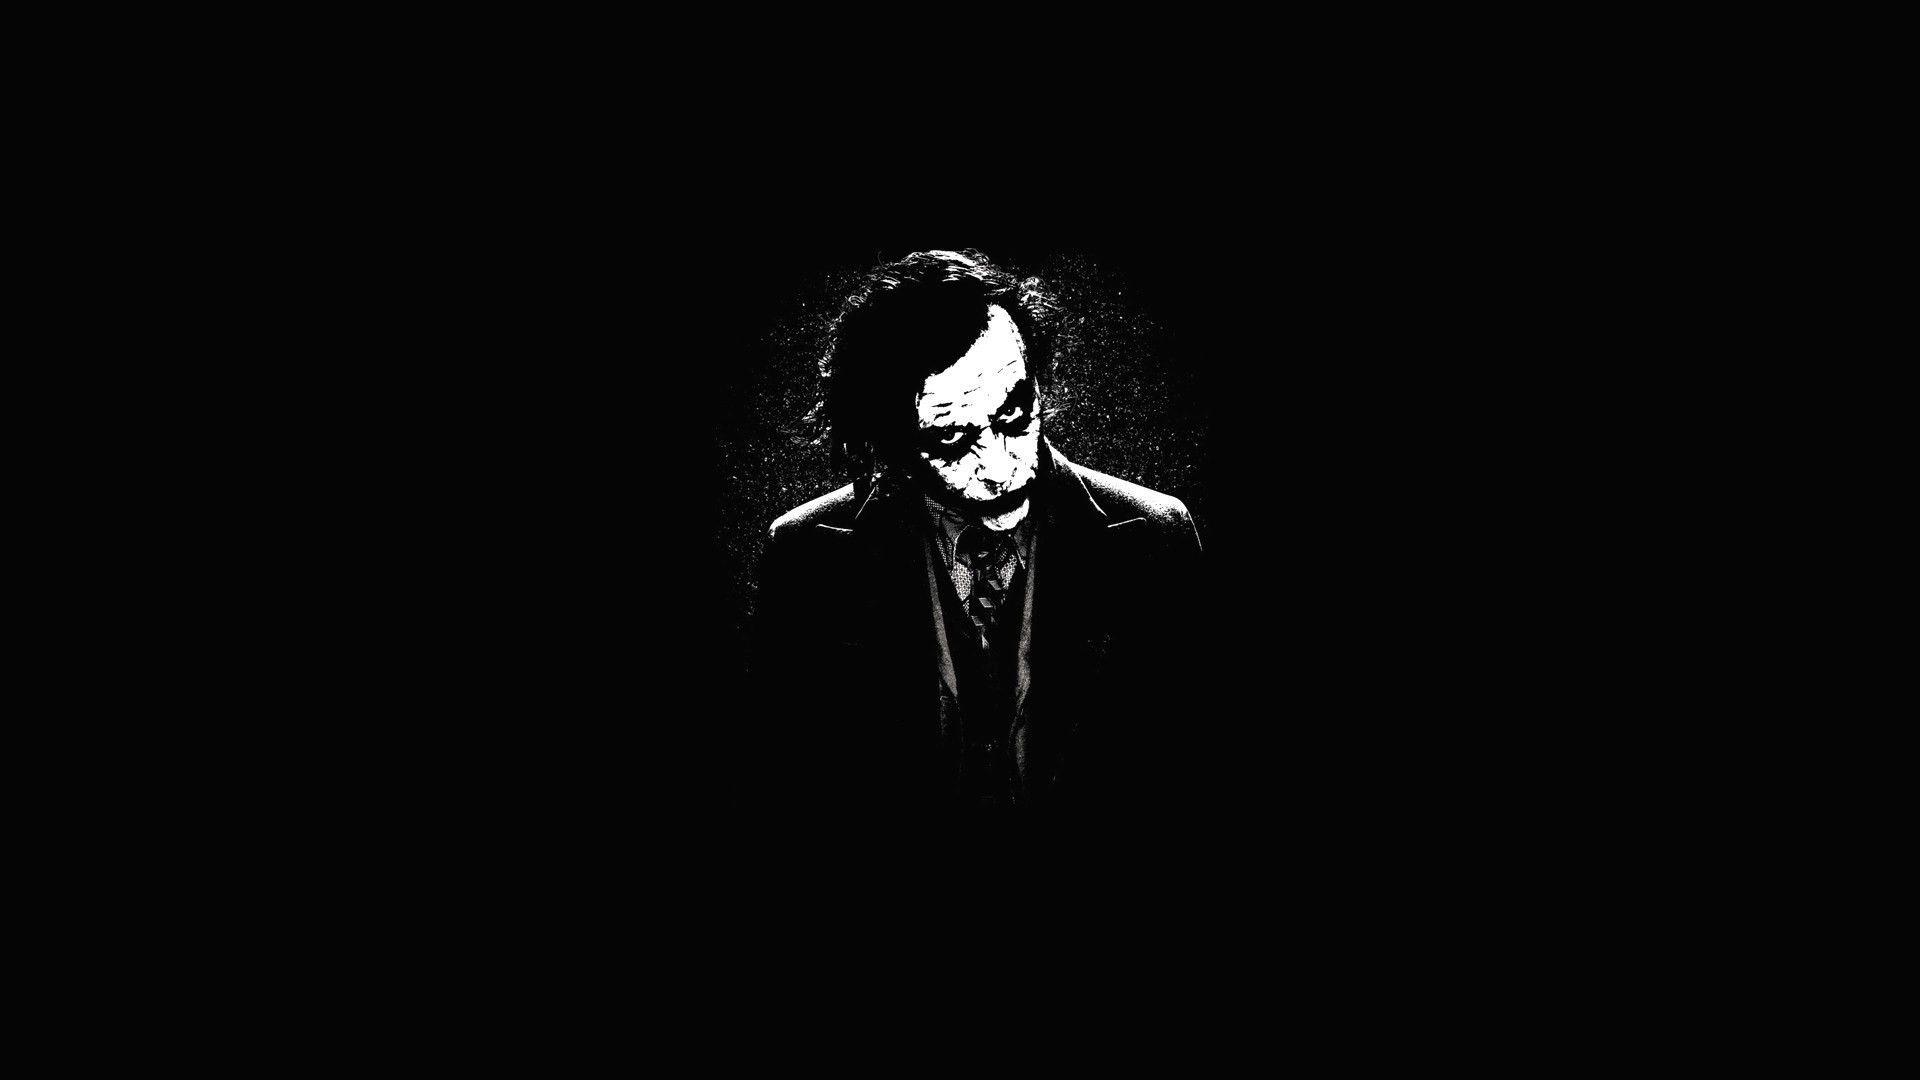 Big Picture Of Joker In Some Black Background, Pictures Of The Joker  Background Image And Wallpaper for Free Download